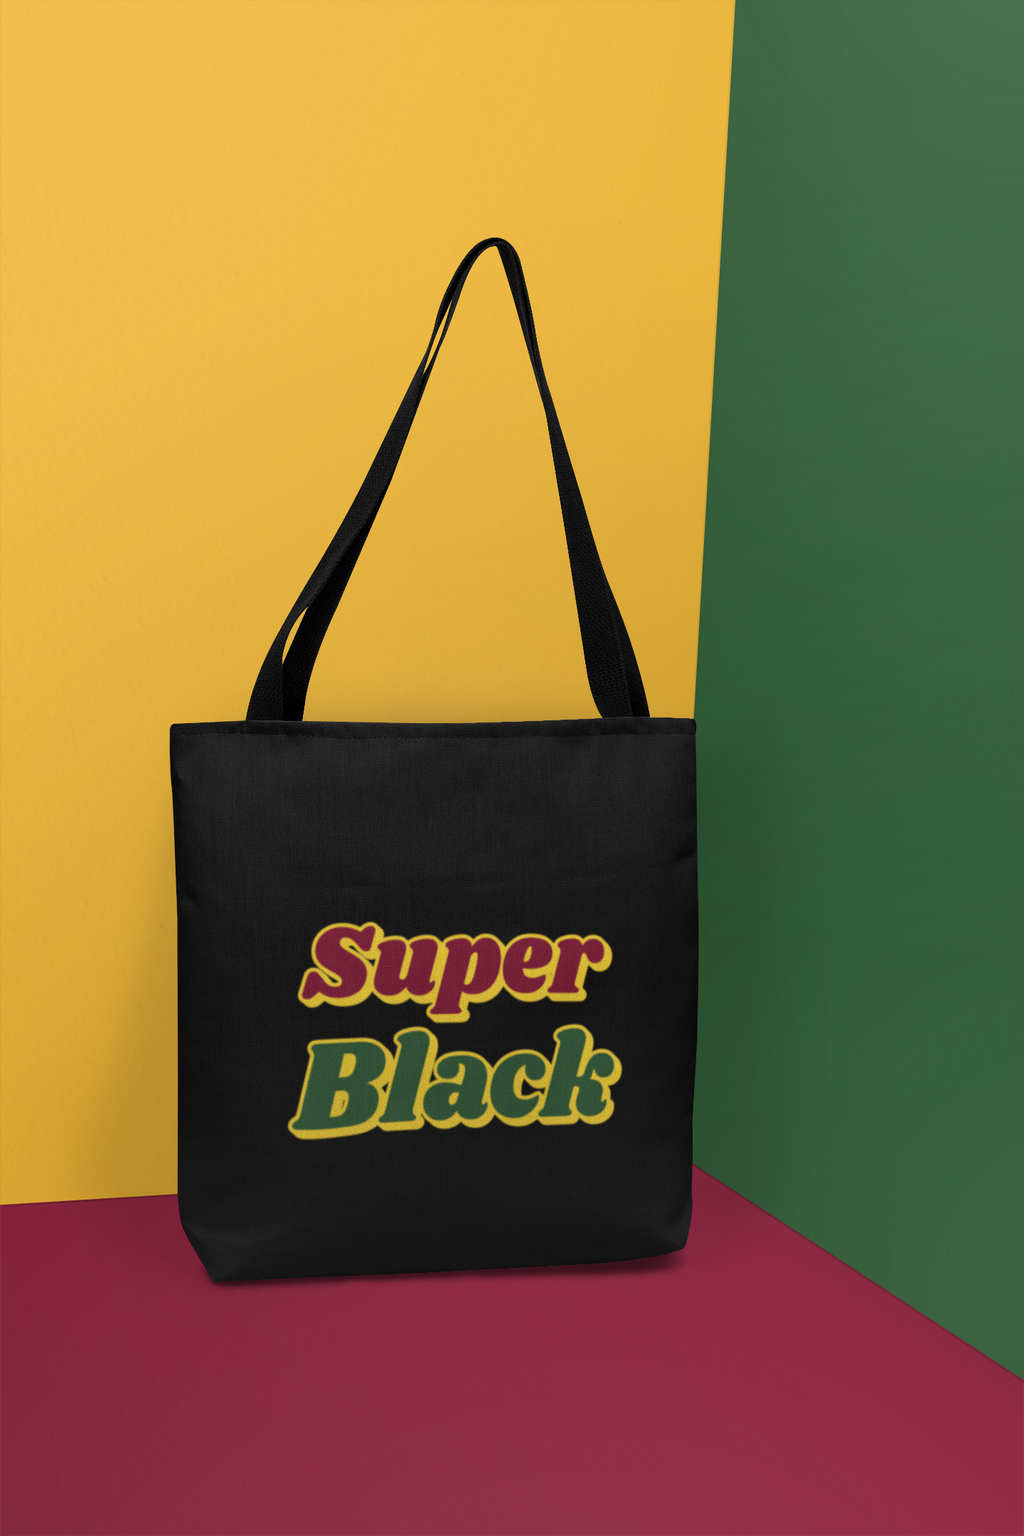 The Super Black tote bag. Created by Yoga and Mahogany.